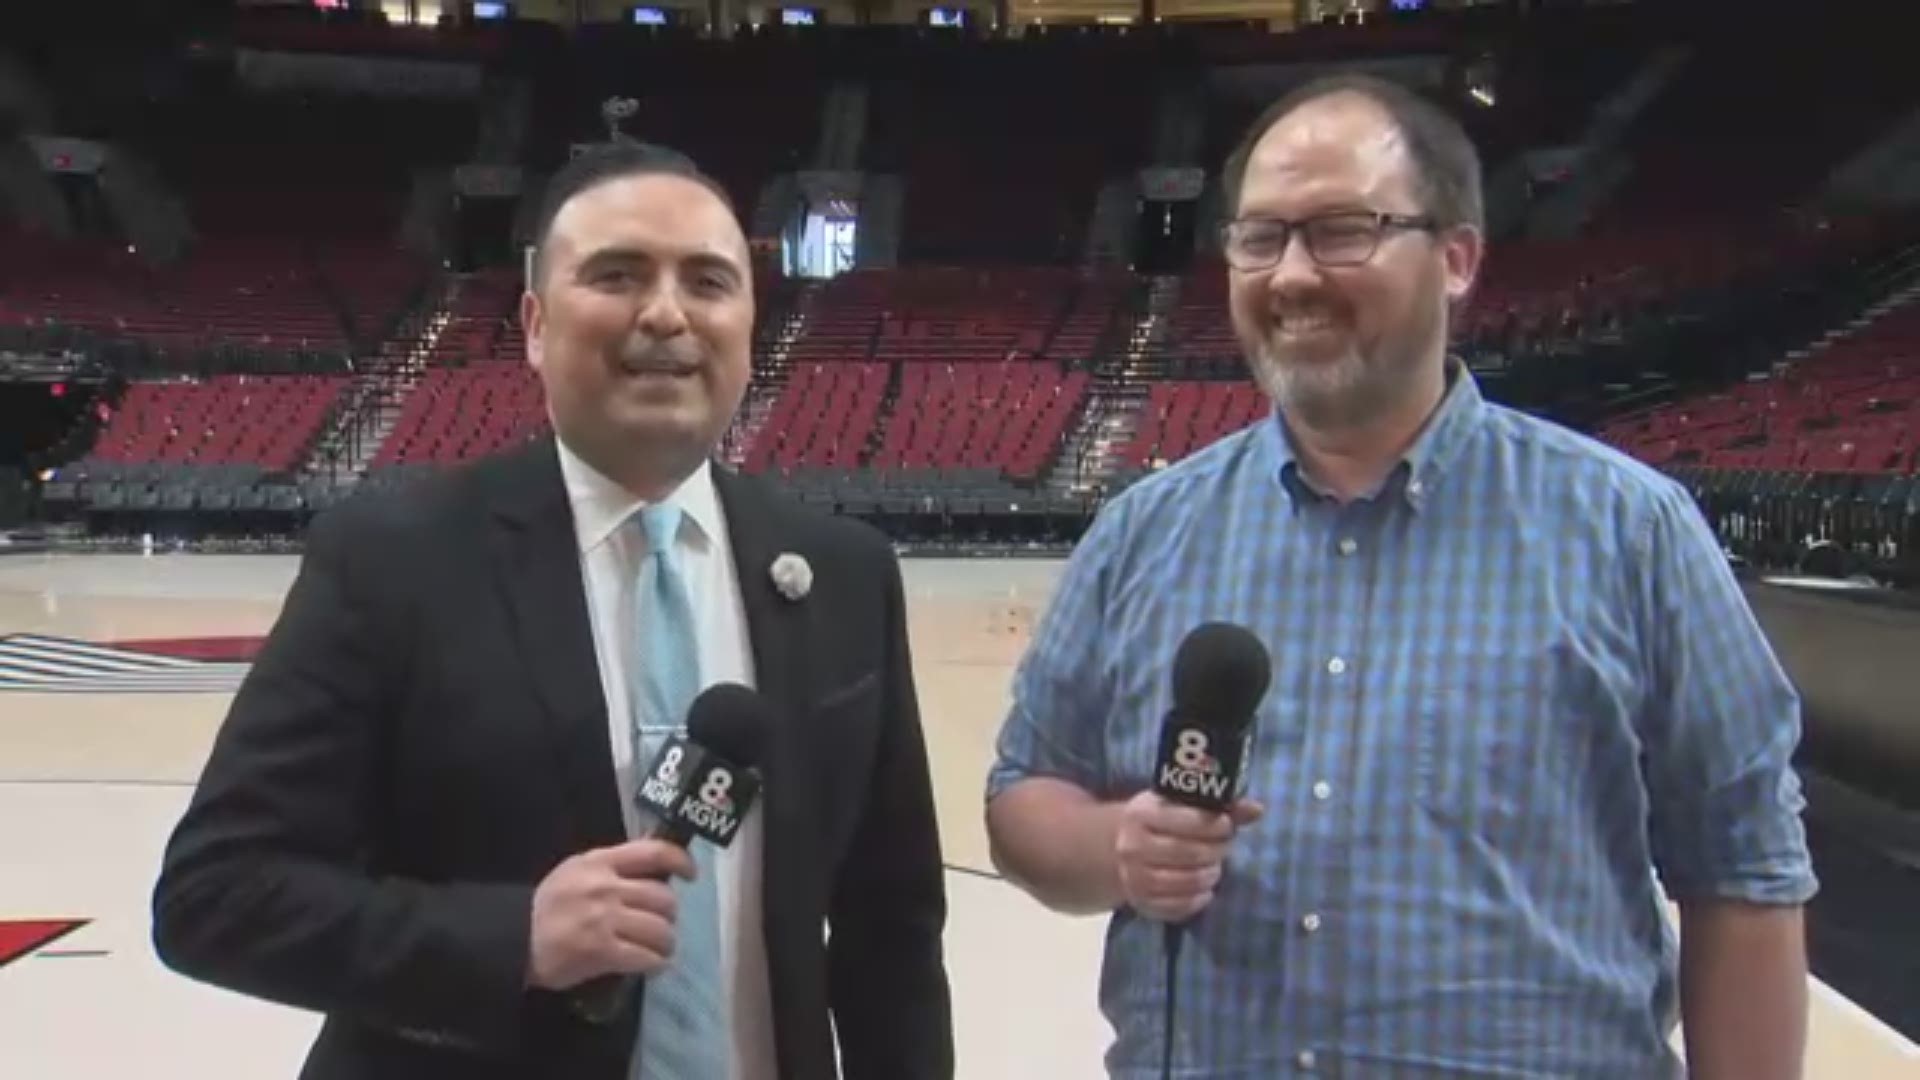 KGW's Orlando Sanchez and Jared Cowley react to the Blazers' 104-99 win in Game 1 against the Oklahoma City Thunder.